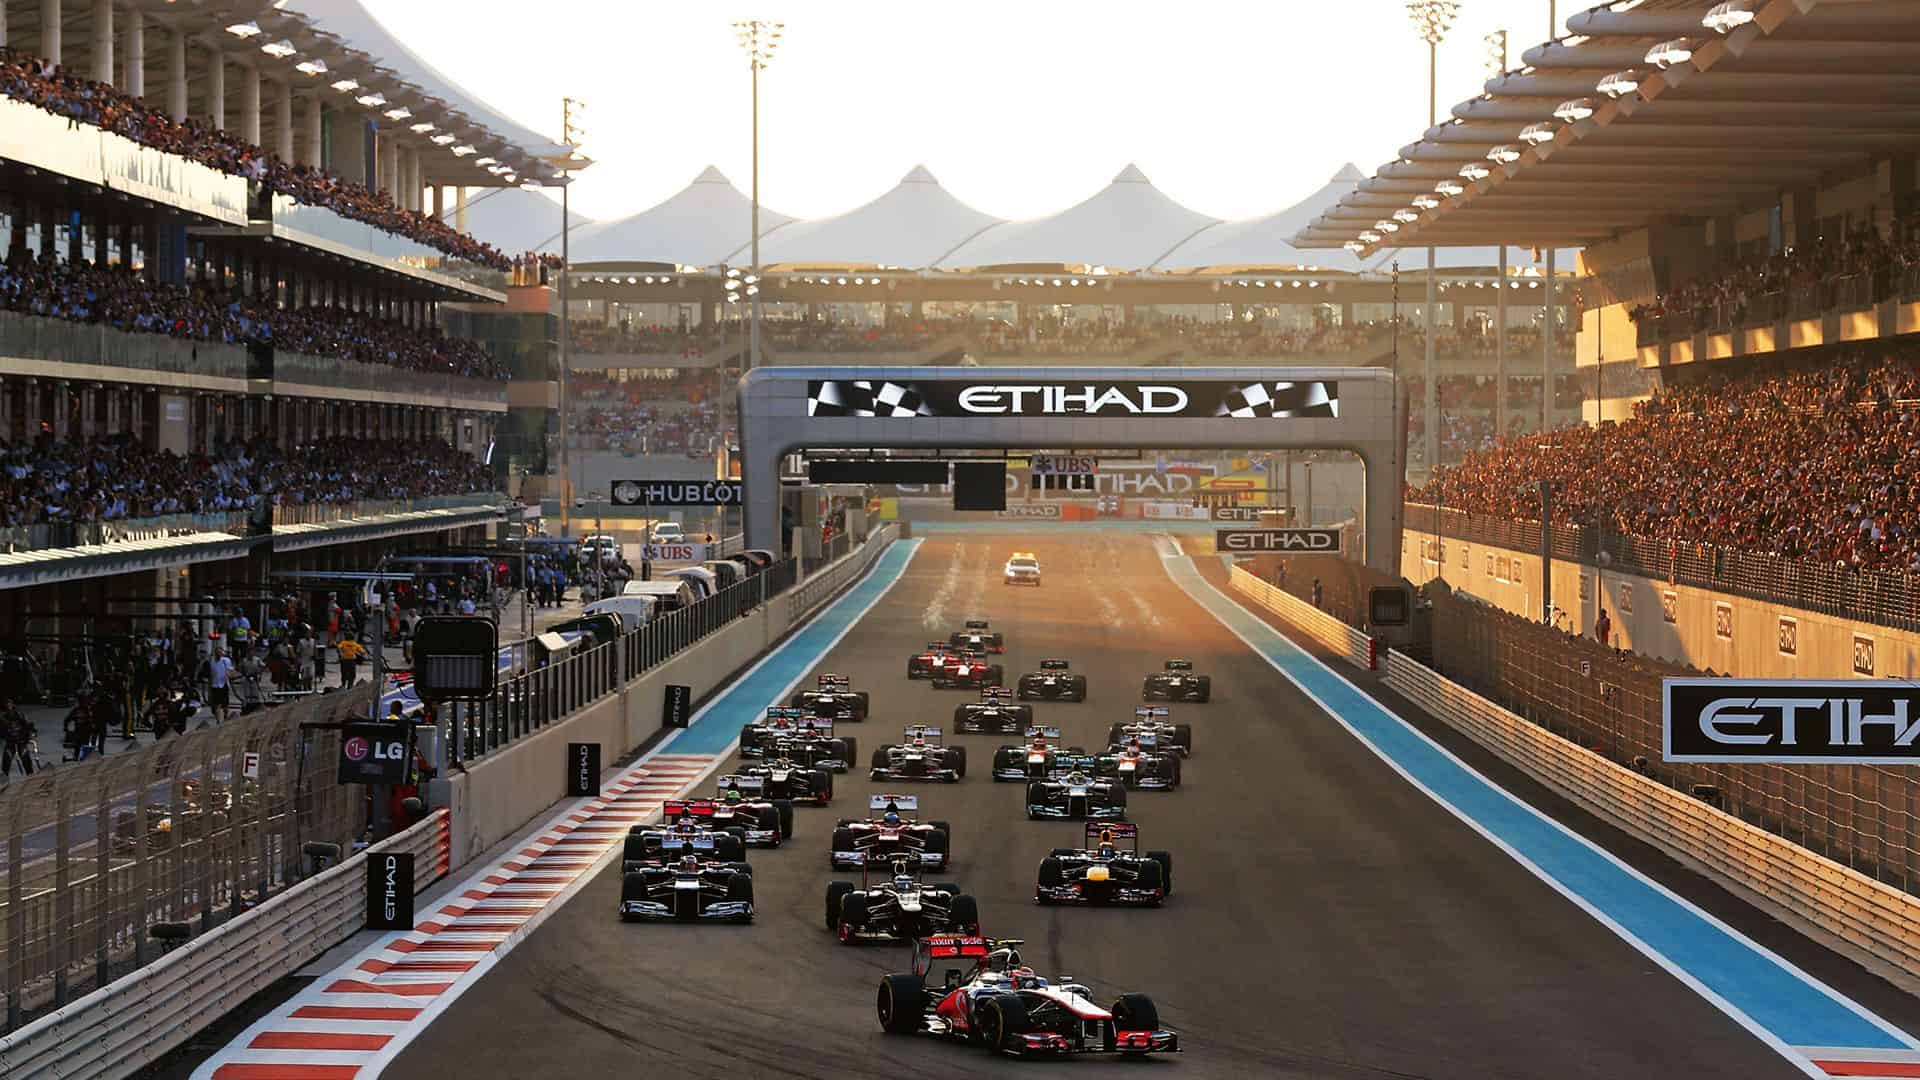 Official Abu Dhabi Grand Prix 2020 Packages & Tickets Join the Waitlist